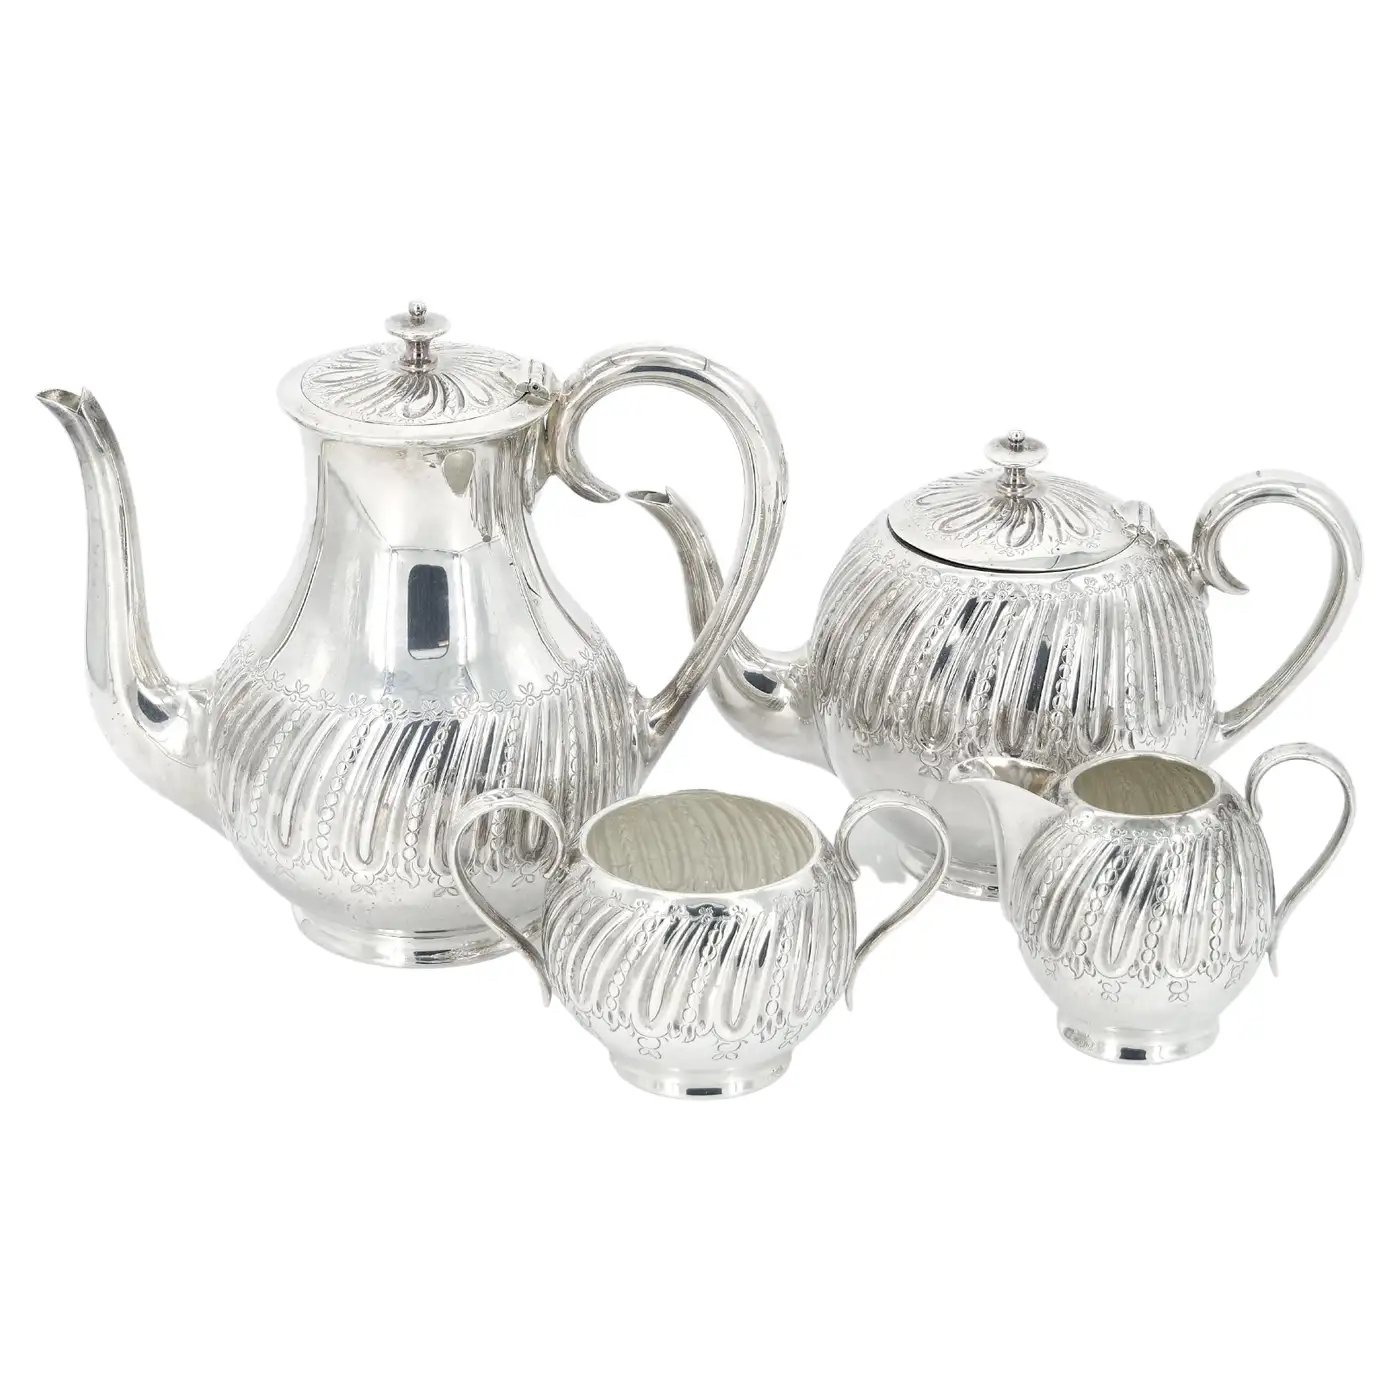 Pair of Vintage Hot Chocolate Jugs, English, Silver Plate, Coffee Serving  Pot For Sale at 1stDibs